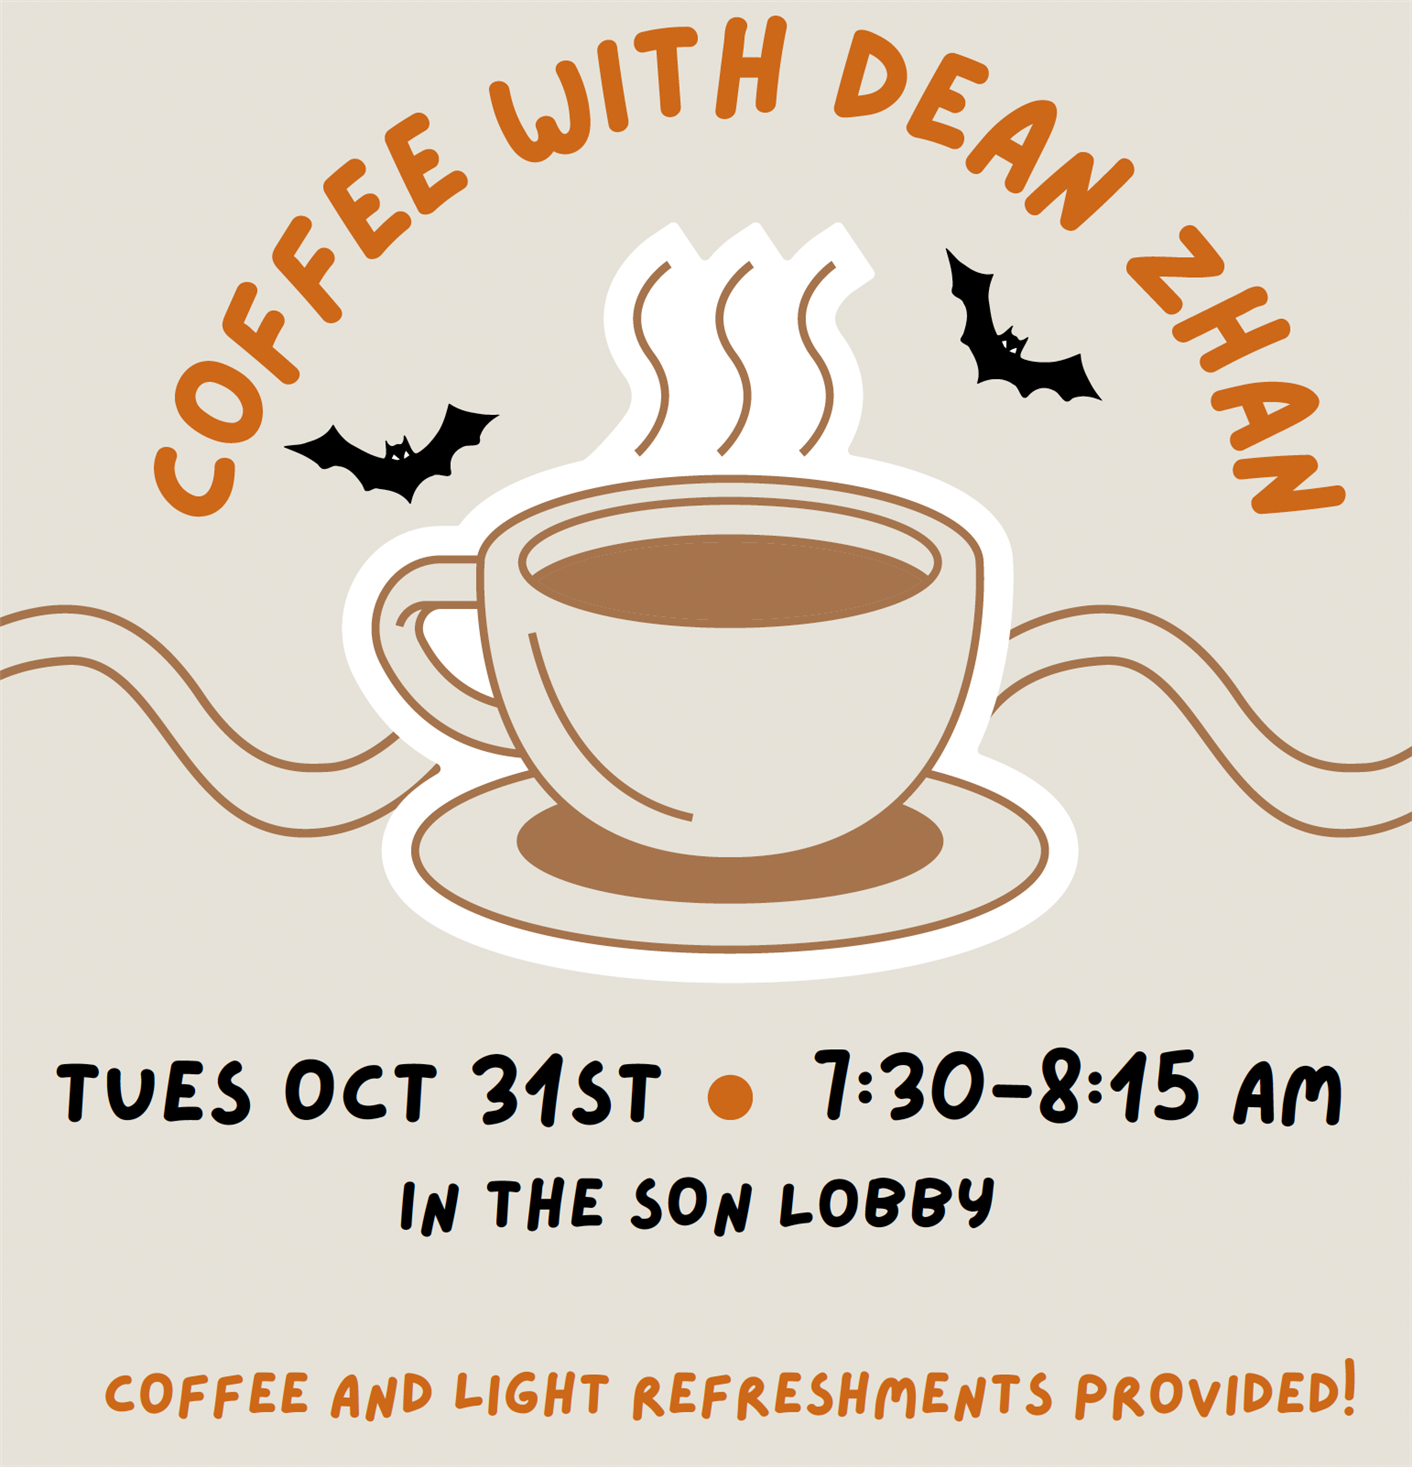 A flyer for the Coffee with Dean Zhan event